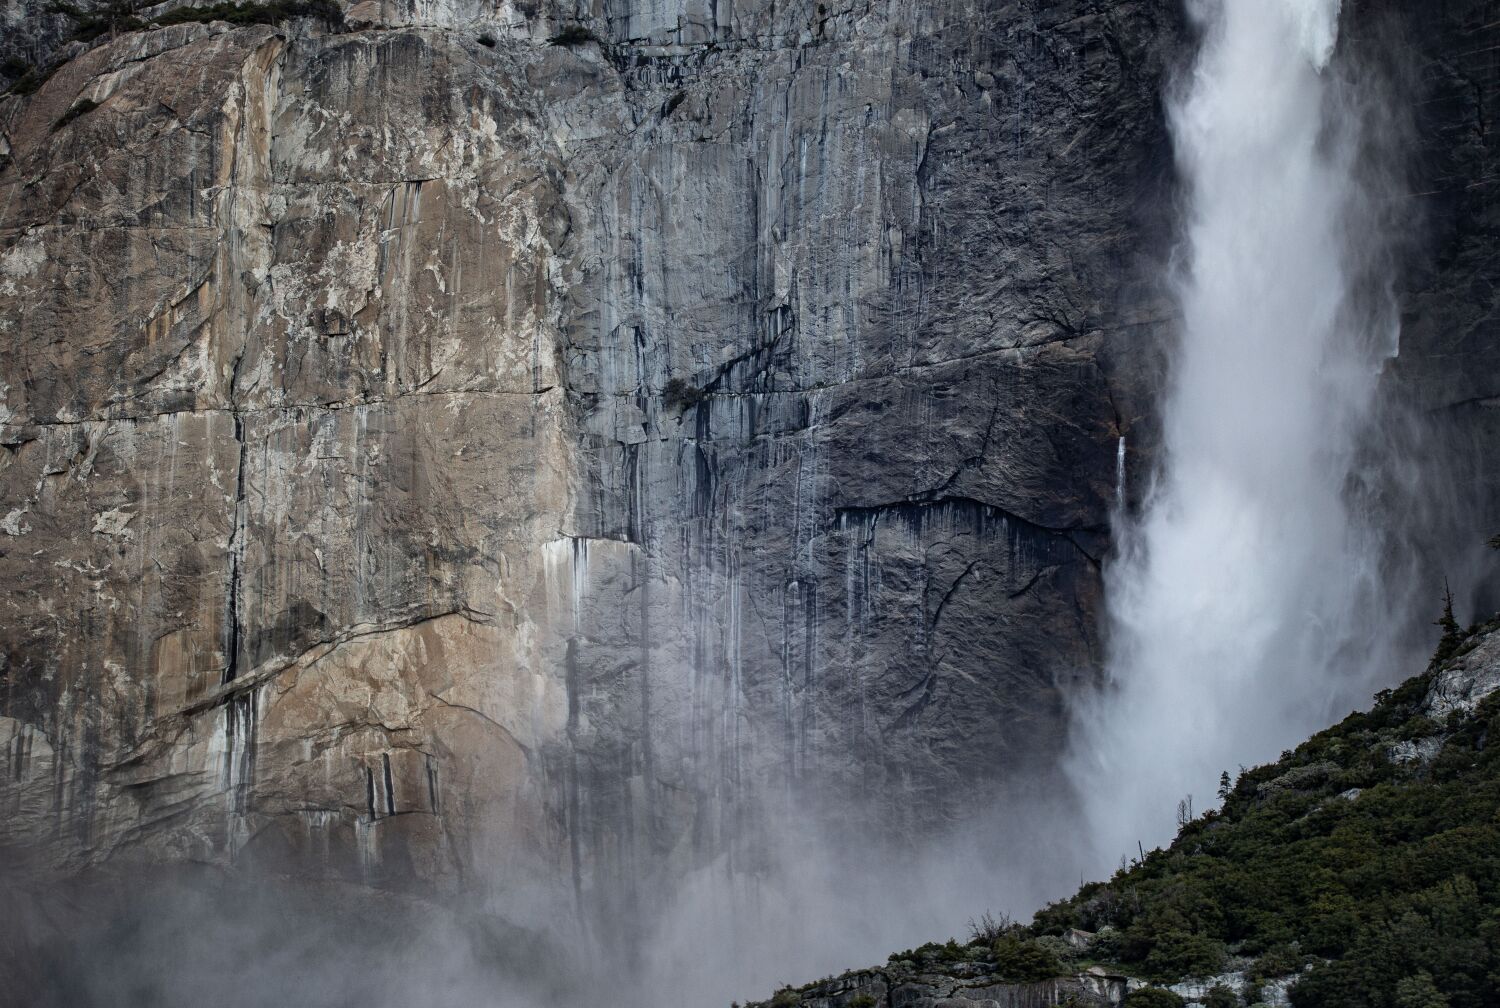 Melting snow means Yosemite's waterfalls are extra spectacular